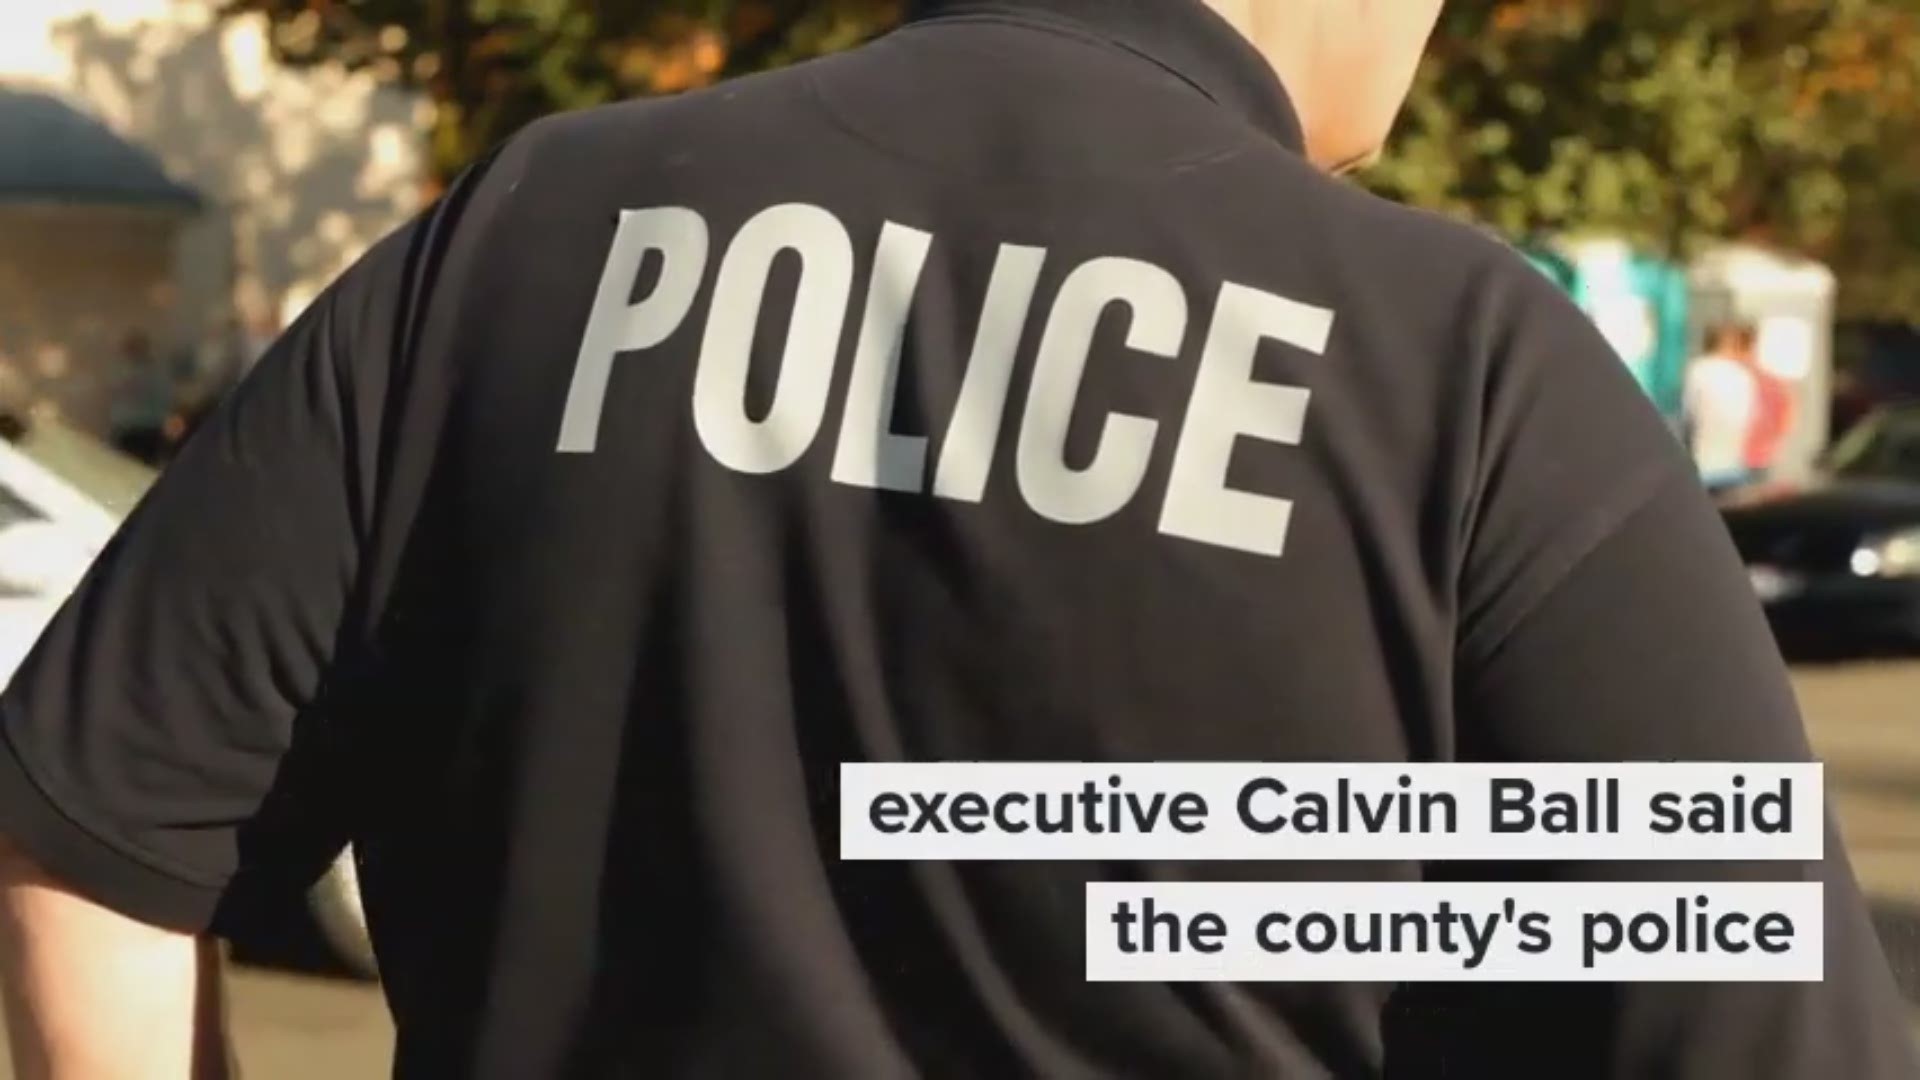 Howard County official Calvin Ball said the county's police department won't support ICE activity.